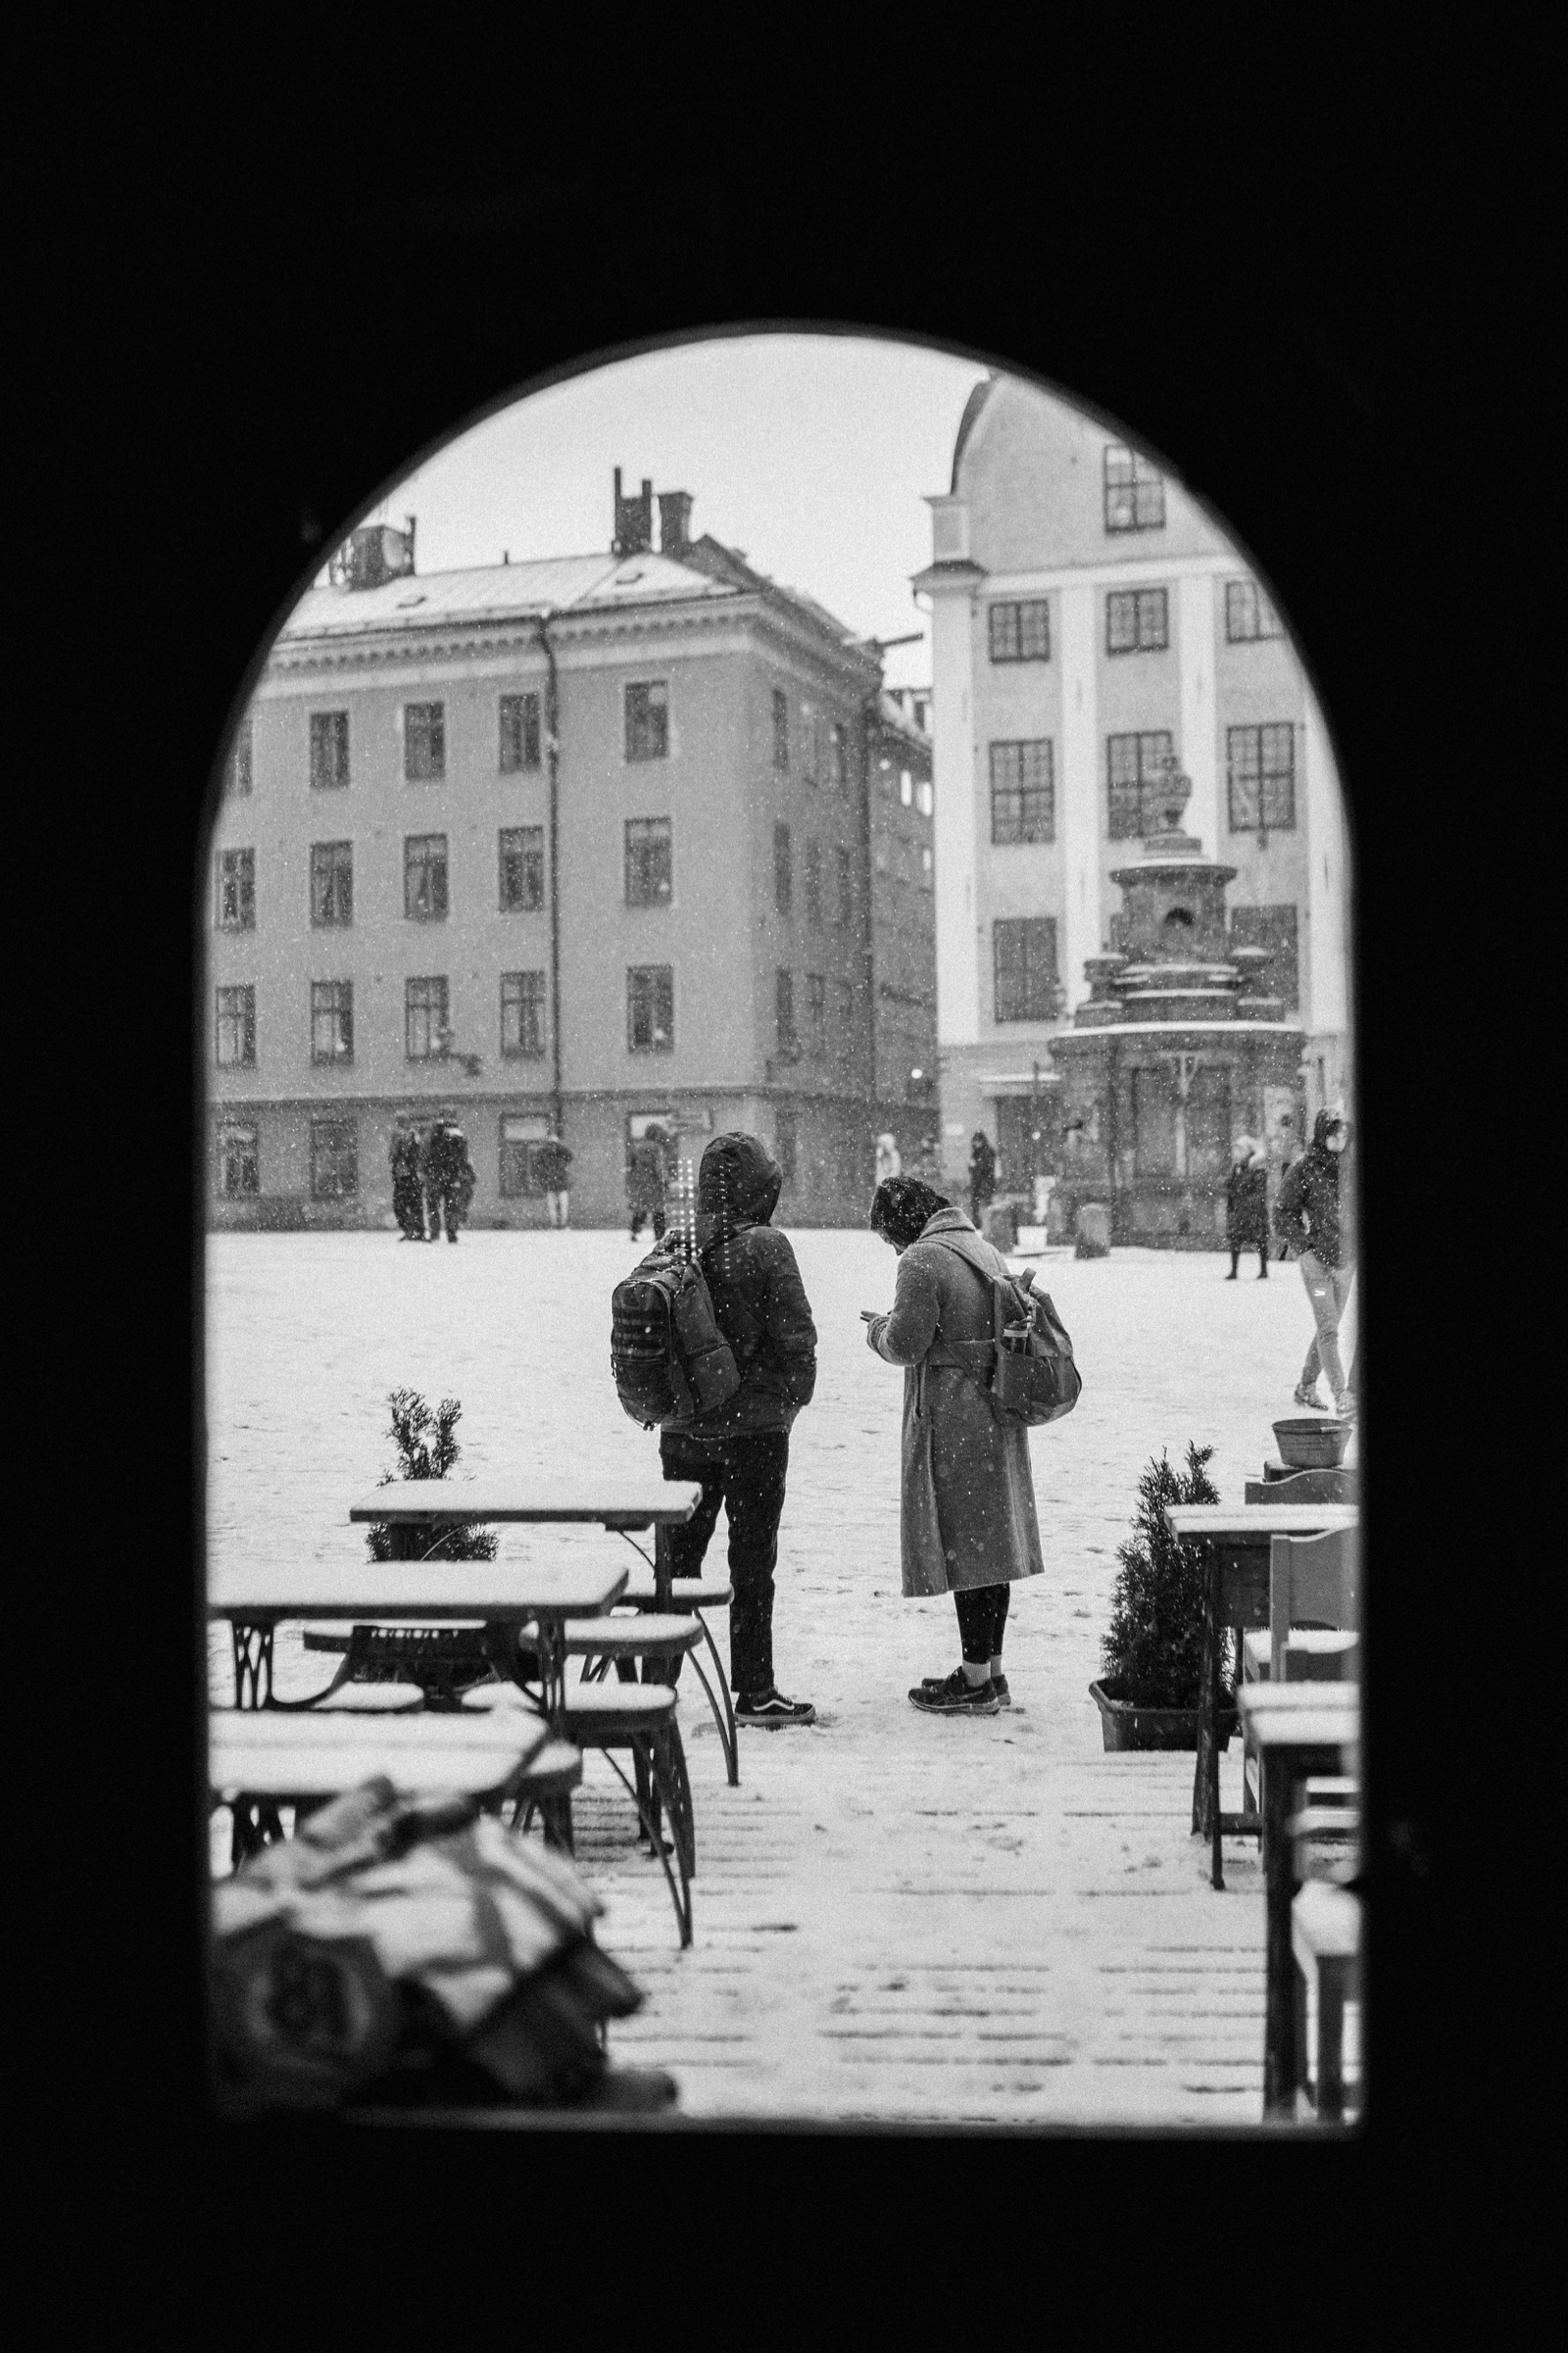 View from a caffe on Stortorget Stockholm